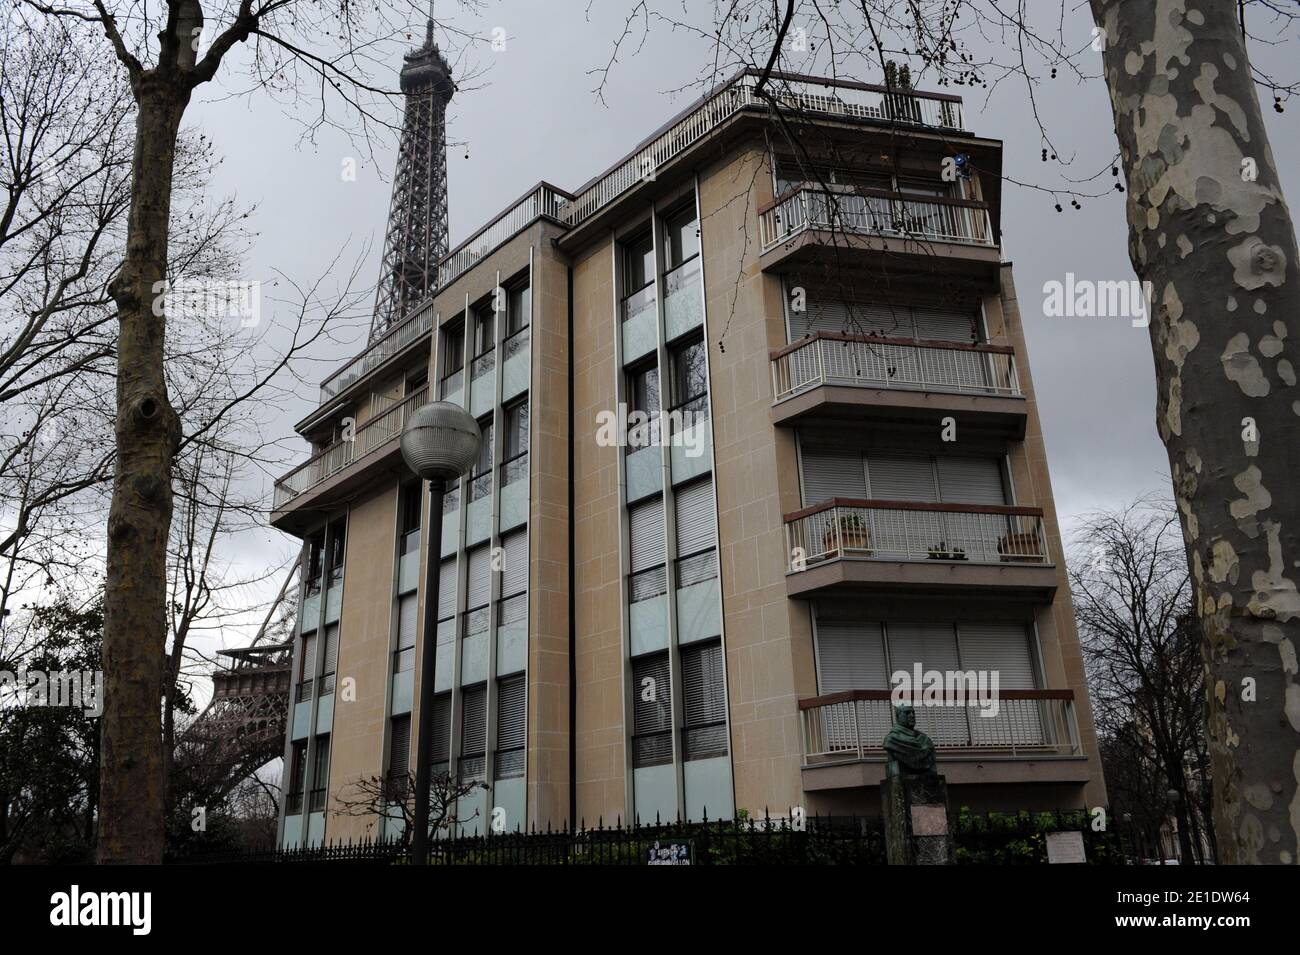 The Parisian appartement of Tunisia's former President Ben Ali's daughter Dorsaf Ben Ali and her husband Slim Chiboub placed in the 7th district, 18, Avenue Elisee-Reclus, in Paris, France, on January 24, 2011. Photo by Pierre Meunie/ABACAPRESS.COM Stock Photo